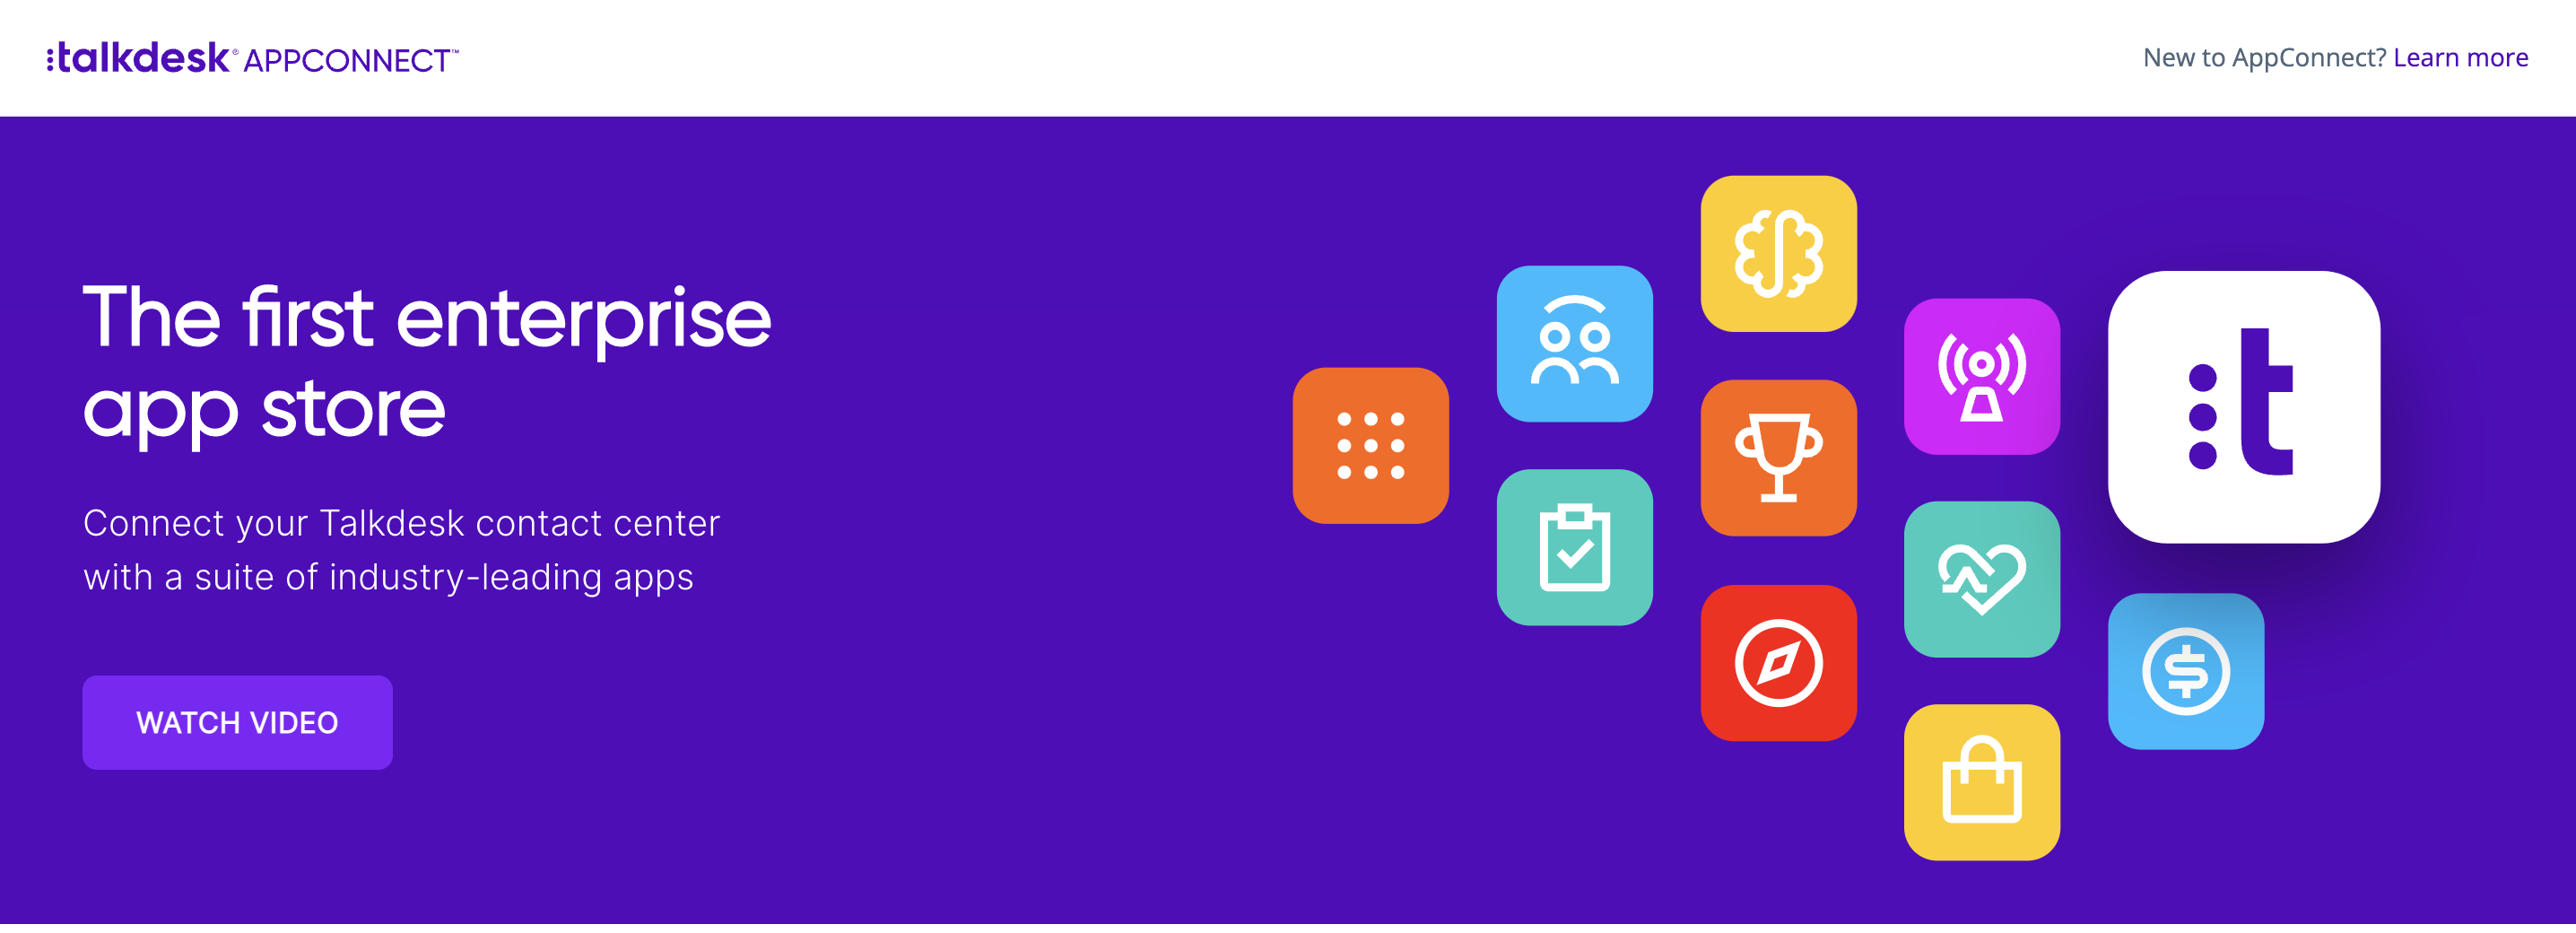 Talkdesk partner app marketplace with app icons